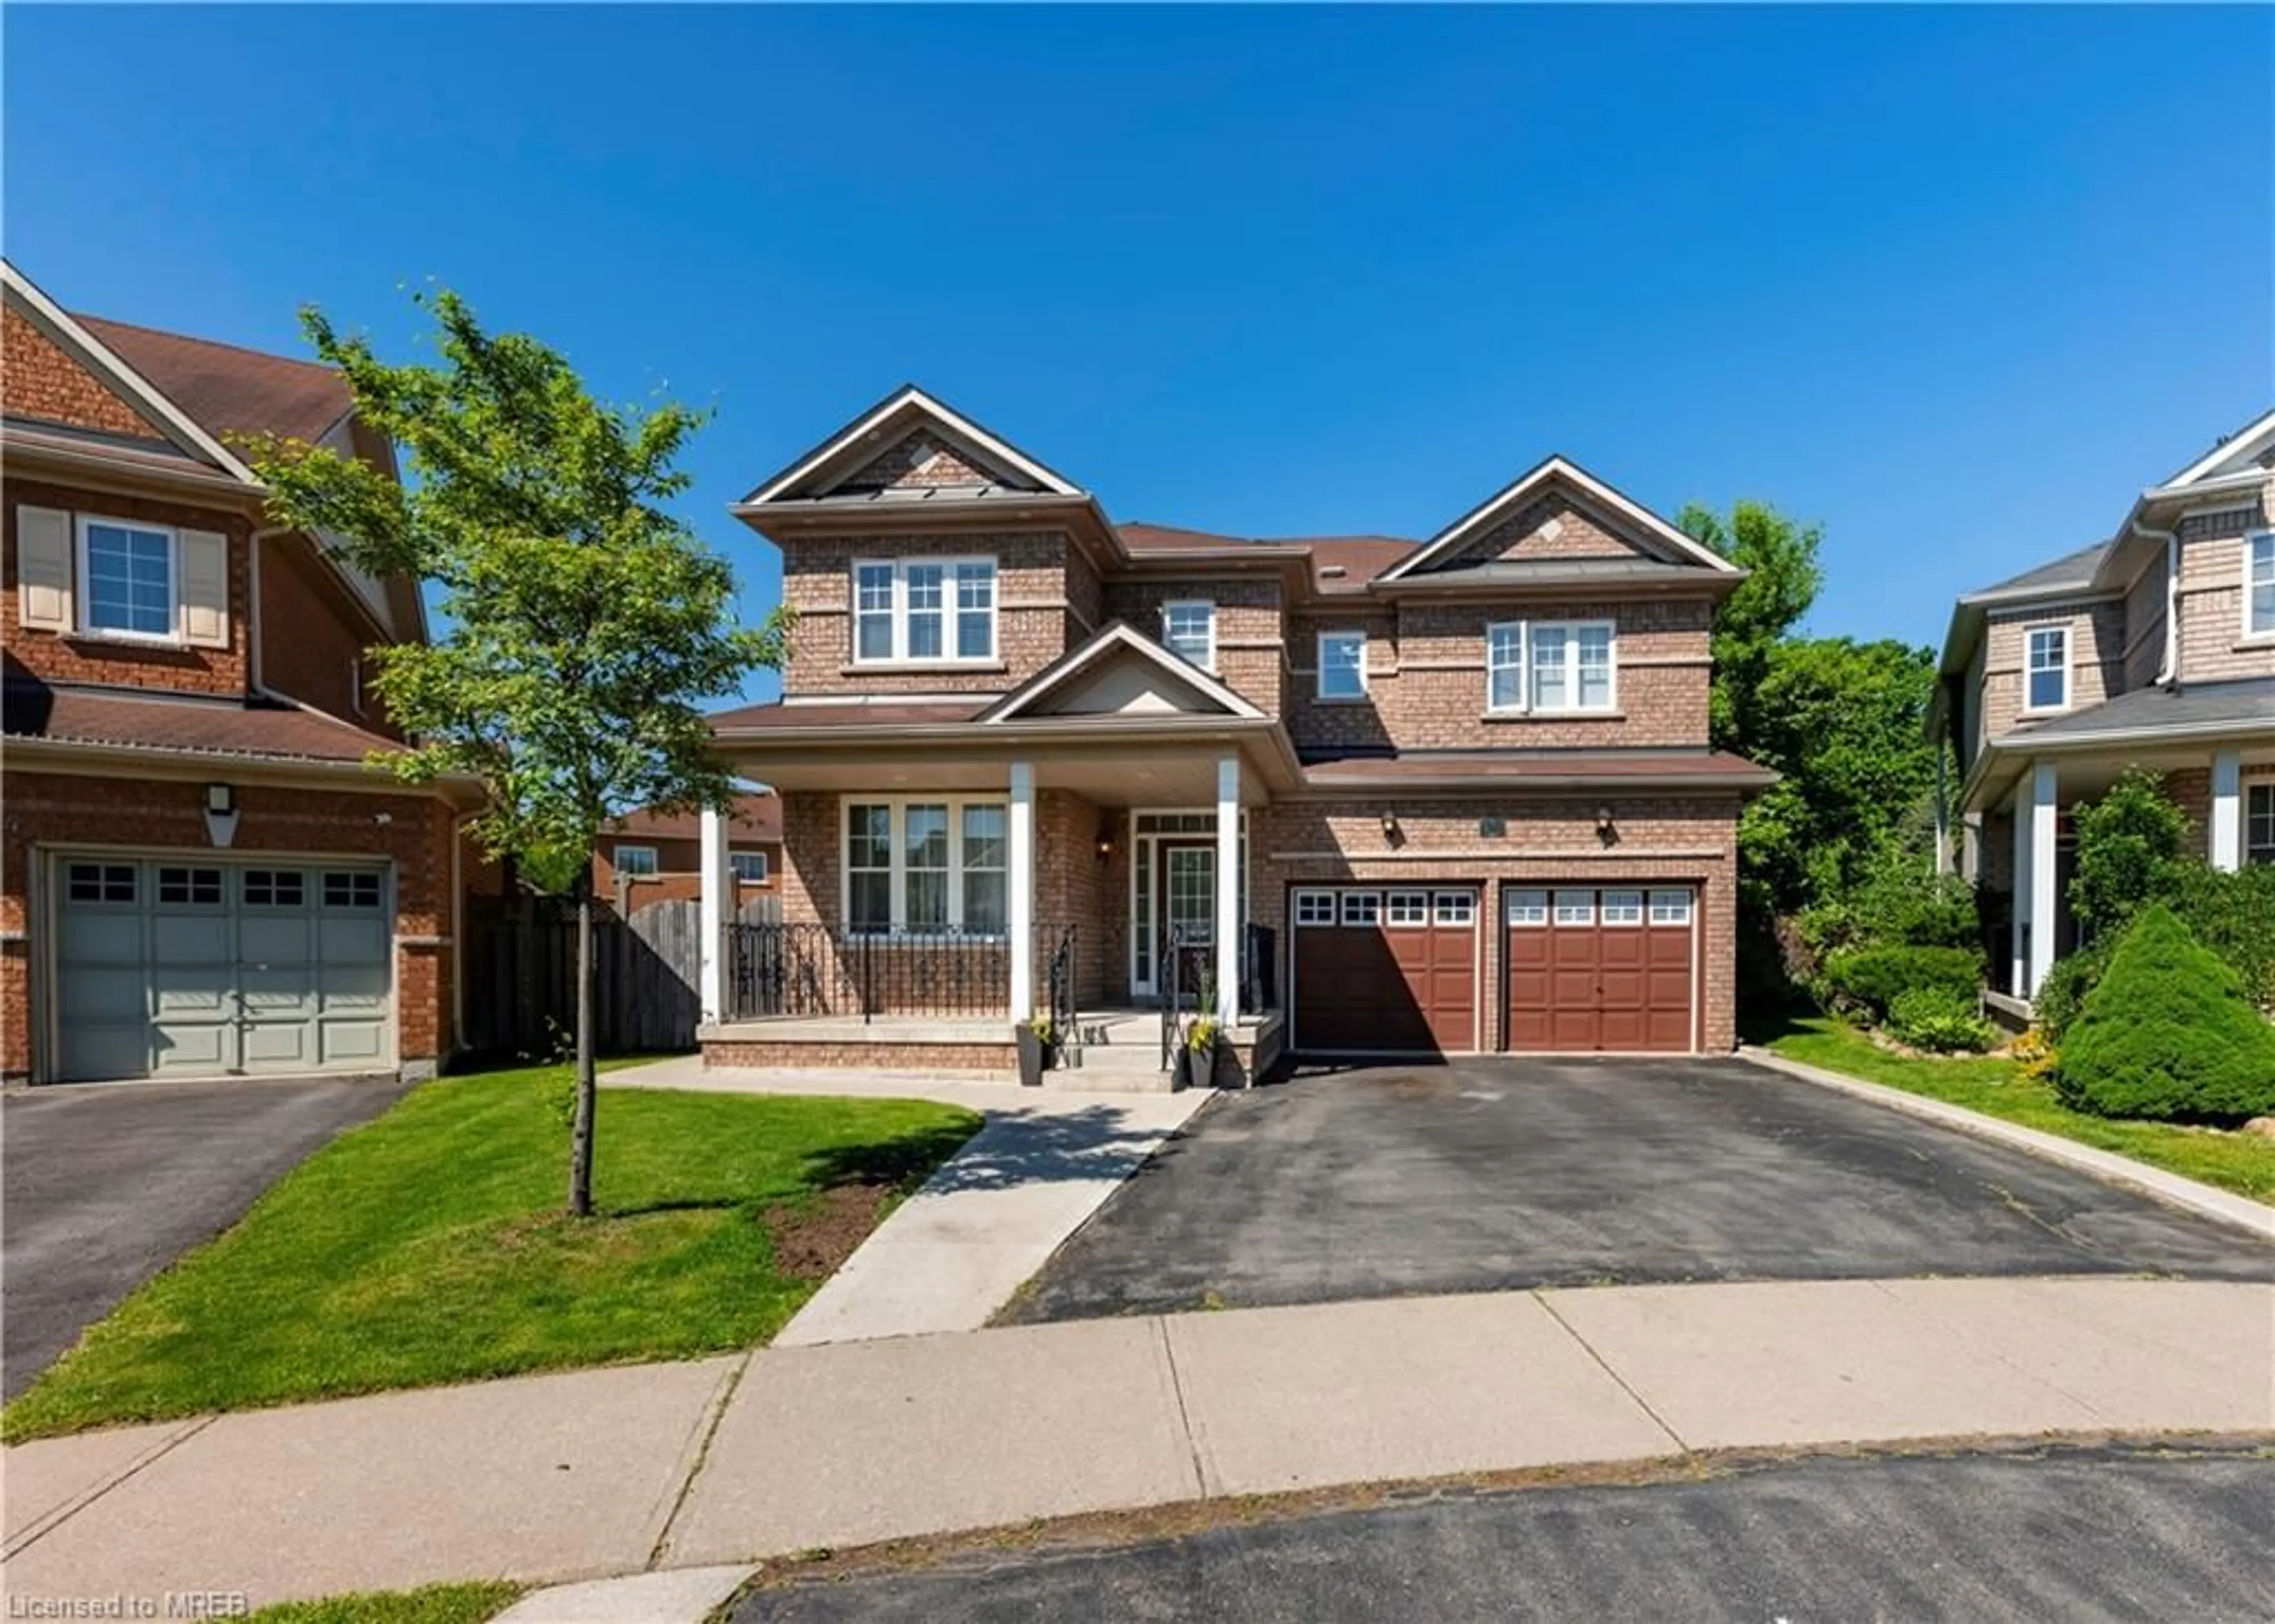 Frontside or backside of a home for 32 Nomad Cres, Brampton Ontario L6Y 5N5